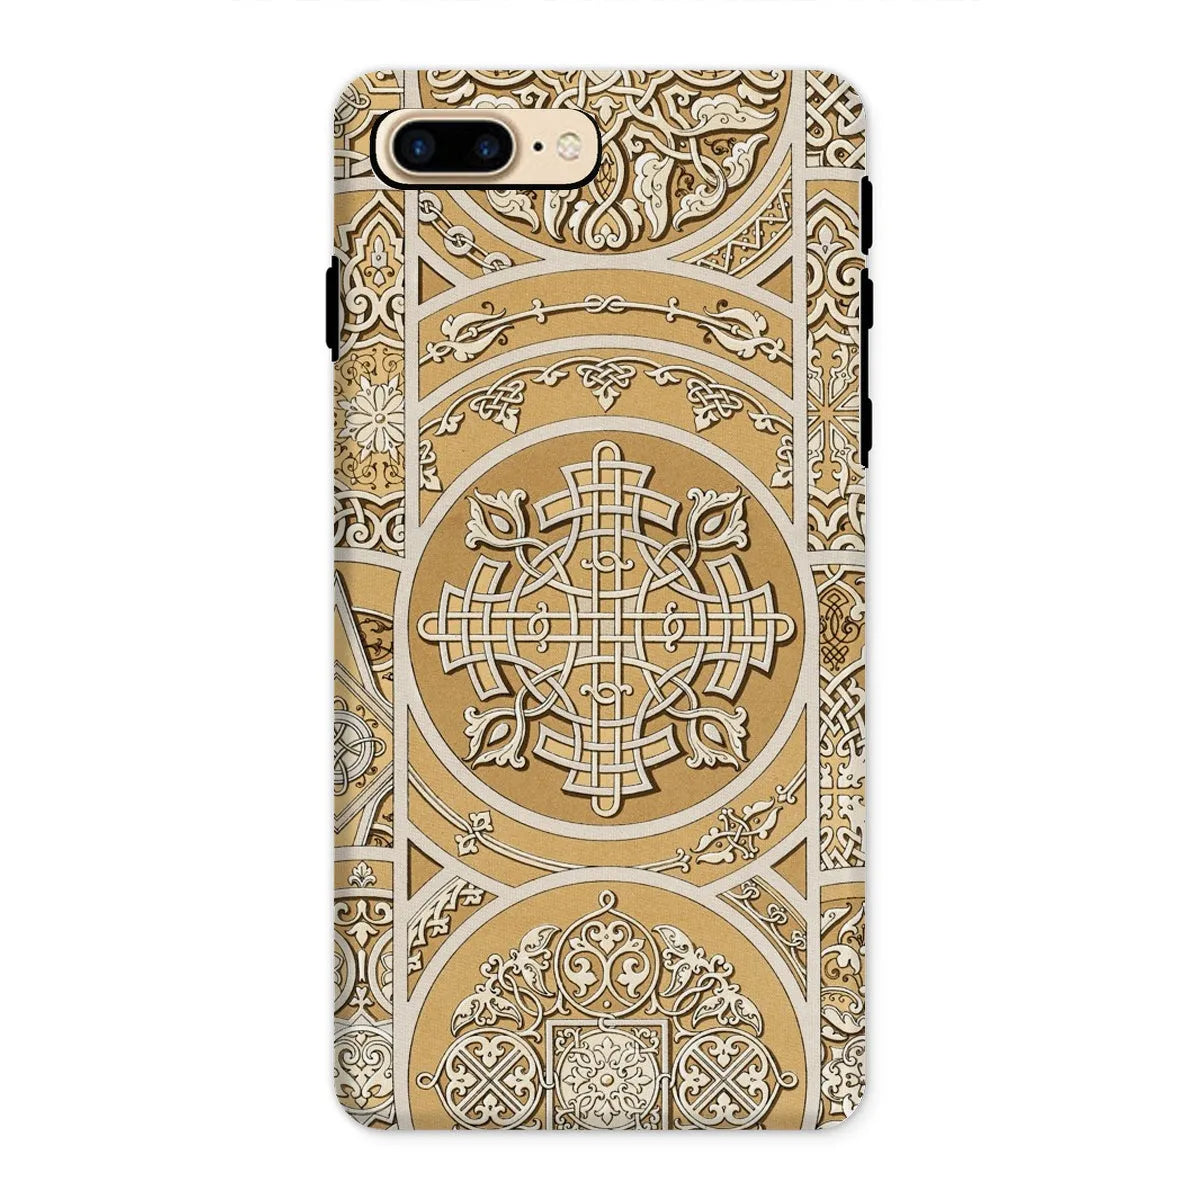 Russian Pattern By Auguste Racinet Tough Phone Case - Iphone 8 Plus / Matte - Mobile Phone Cases - Aesthetic Art